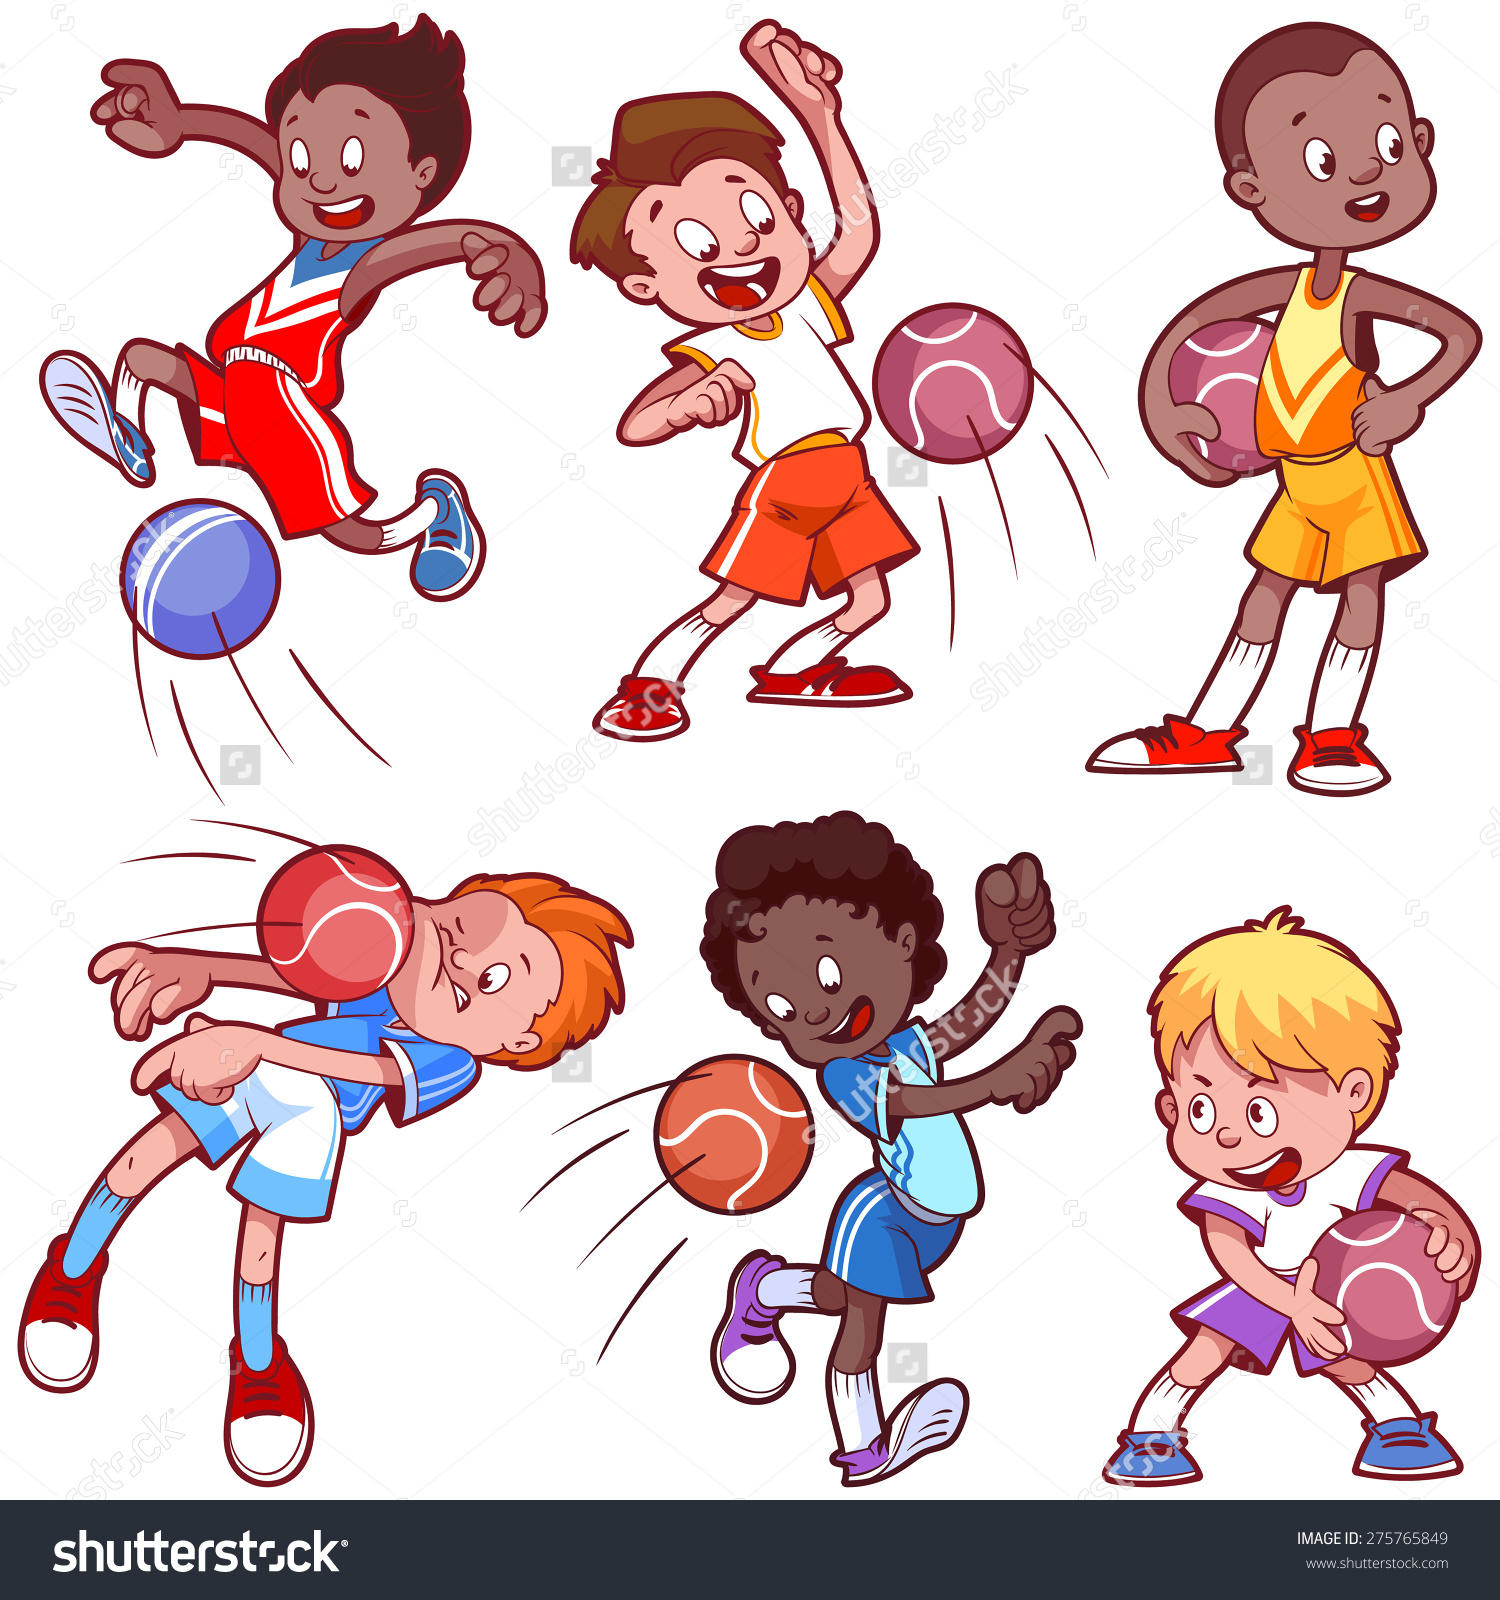 Cartoon boys playing dodgeball. Vector clip art illustration on a white background.